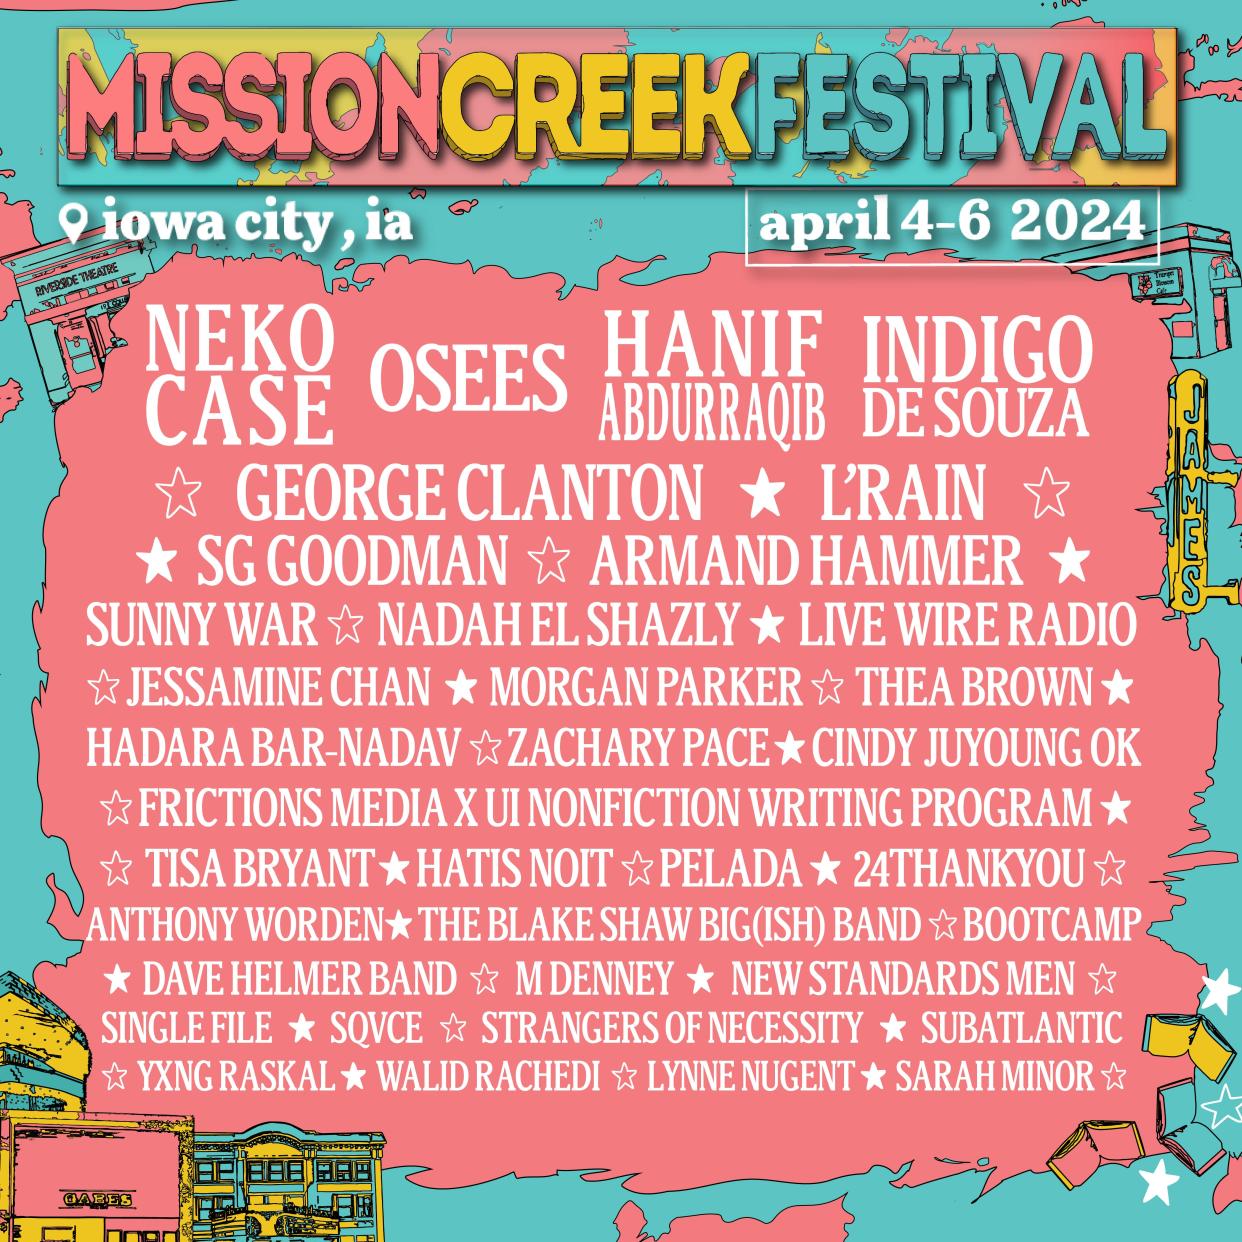 Mission Creek this year boasts a lineup of over 30 talented musical and literary minds from across the globe. The three-day festival promises an immersive experience for attendees.